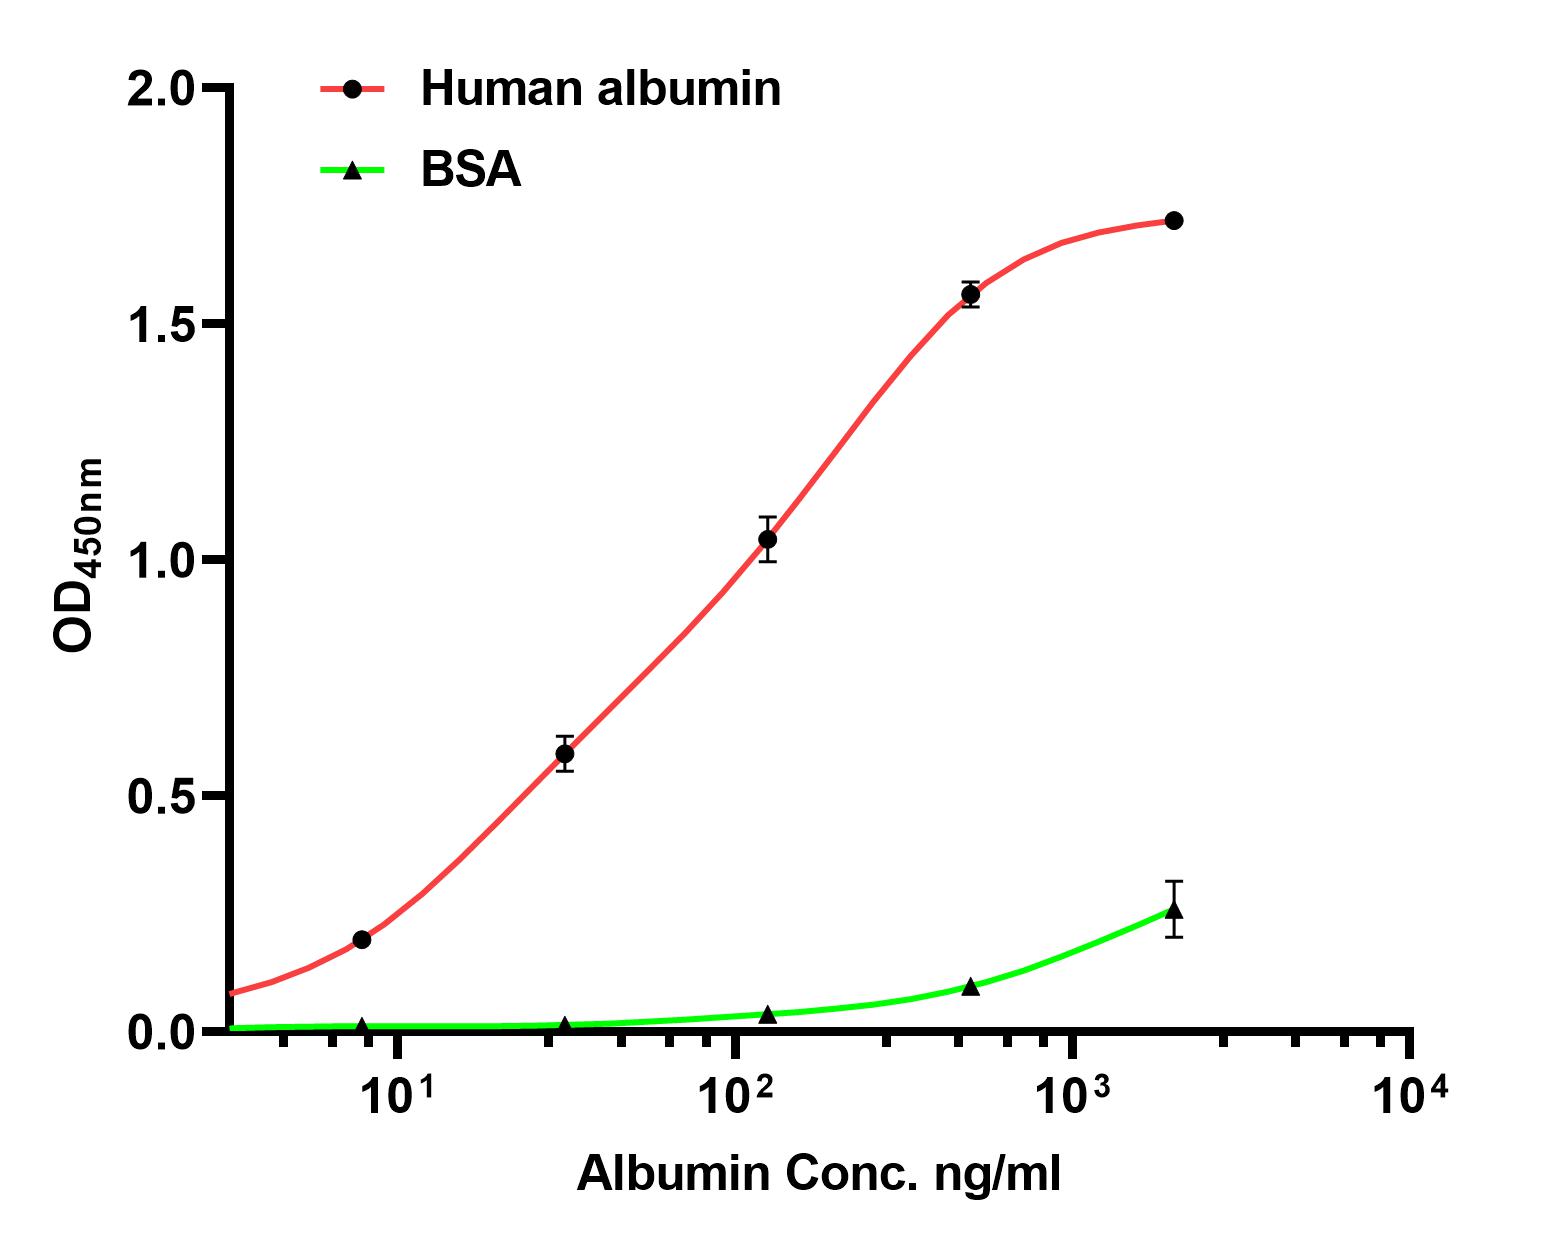 Albumin Antibody (EM1901-81) in direct ELISA.<br />
<br />
Direct ELISA analysis of Albumin was performed by coating wells of a 96-well plate with 50 µl per well of human albumin antigen or BSA diluted in carbonate/bicarbonate buffer, at a concentration of 1 µg/mL overnight at 4℃. Wells of the plate were washed, blocked with StartingBlock blocking buffer, and incubated with 50 µl per well of a mouse Albumin monoclonal antibody starting at a concentration of 2 µg/mL and serially diluting it to a concentration of 1.95 ng/mL for 2 hours at room temperature. The plate was washed and incubated with 50 µl per well of an HRP-conjugated goat anti-mouse IgG secondary antibody at a dilution of 1:10,000 for one hour at room temperature. Detection was performed using an Ultra TMB Substrate for 5 minutes at room temperature in the dark. The reaction was stopped with sulfuric acid and absorbances were read on a spectrophotometer at 450 nm.